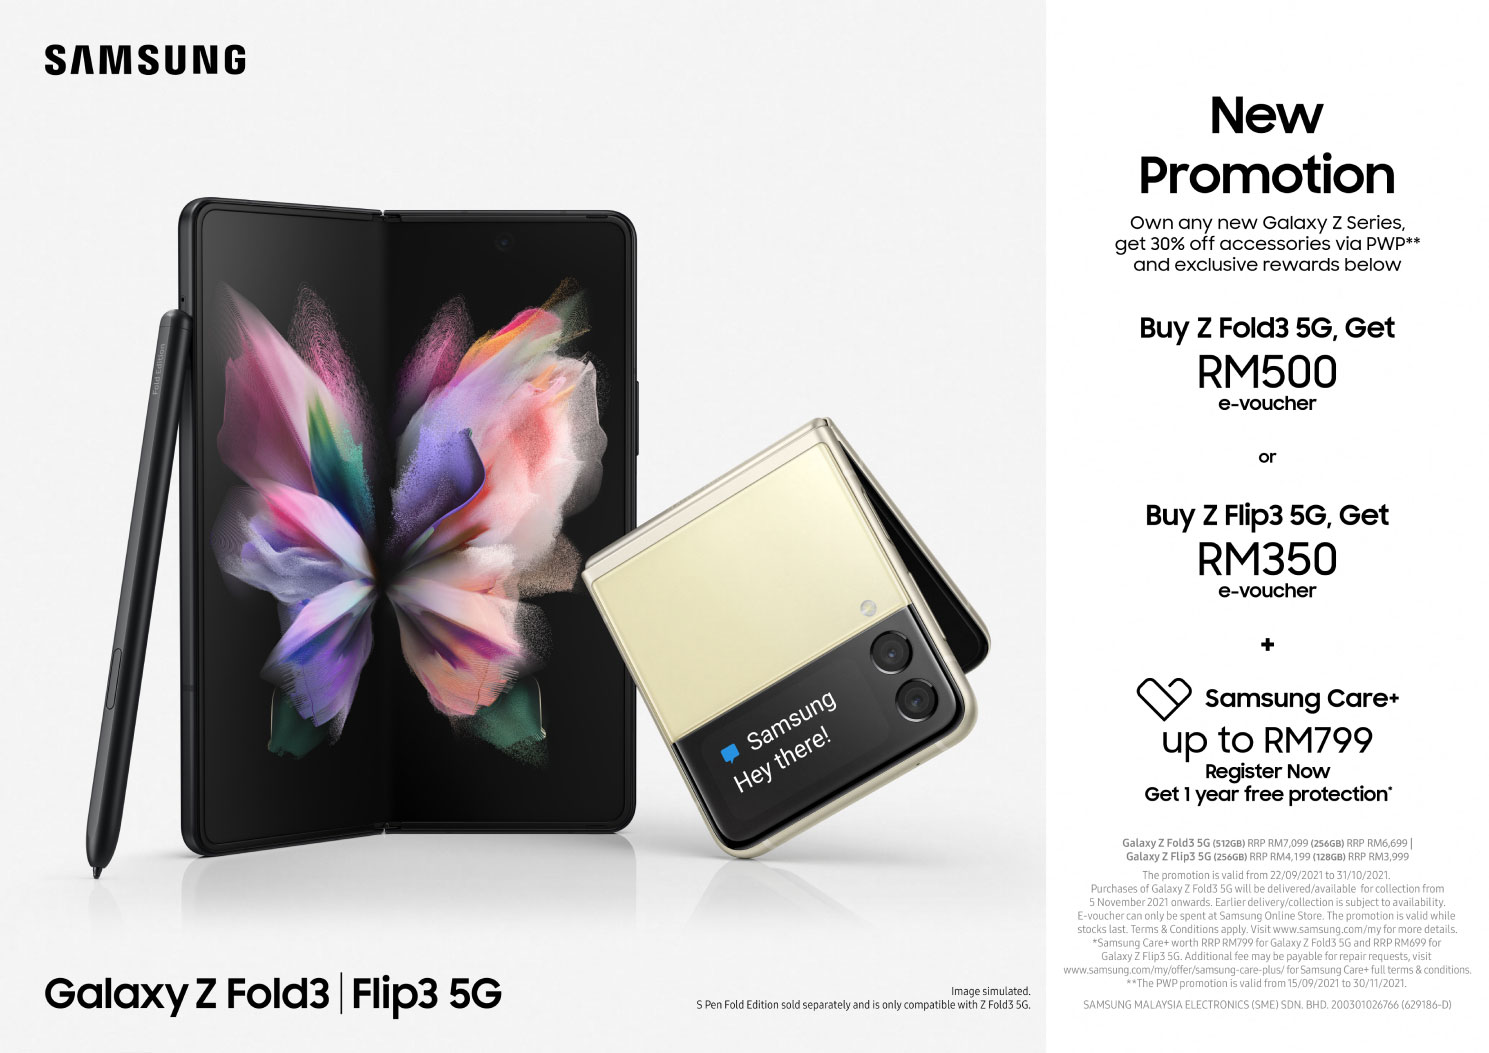 Samsung Galaxy Z Fold3 and Galaxy Z Flip3 Available in Malaysia on September 22